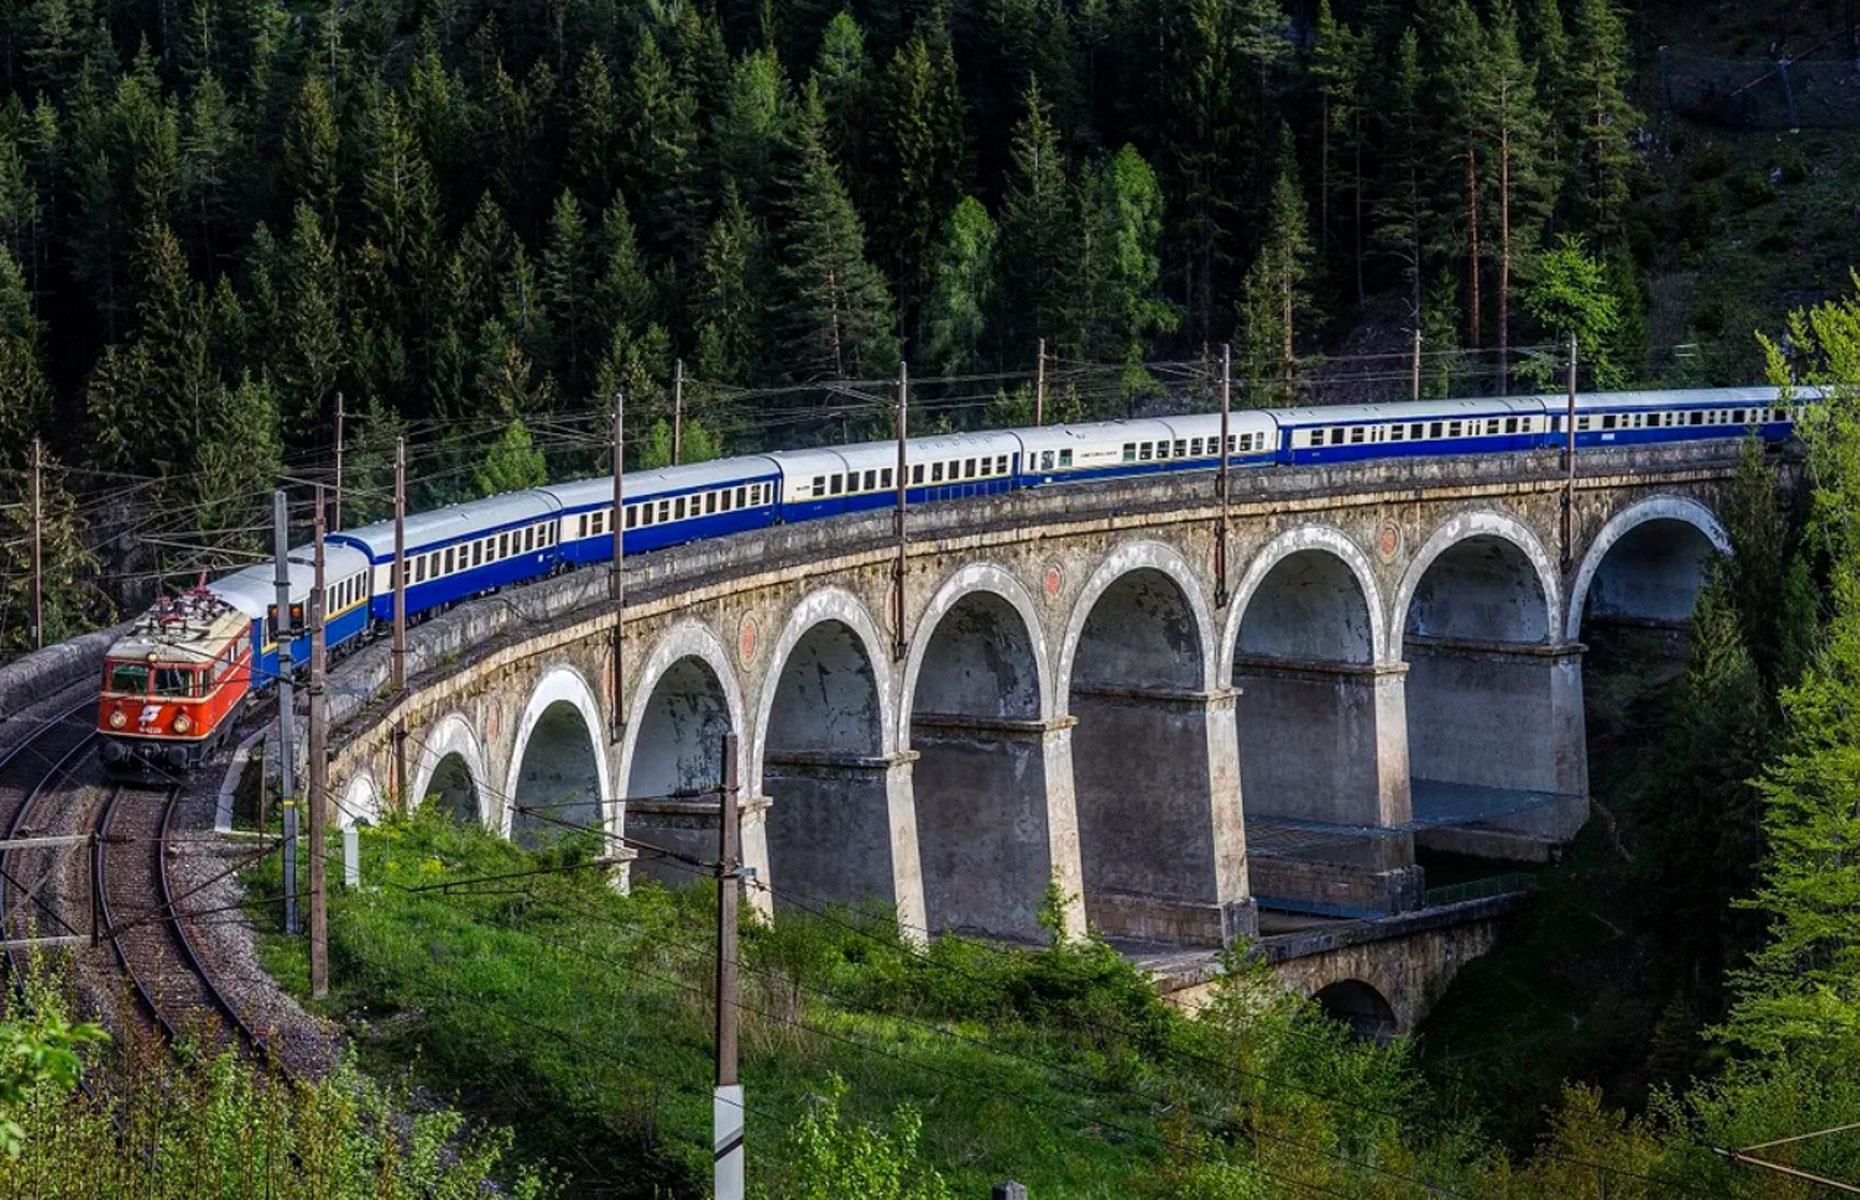 <p>Founded in 1989 by businessman Tim Littler, the UK's Golden Eagle describes itself as an operator of "the world's leading luxury private trains". </p>  <p>The firm has indefinitely suspended its best-known service, the <em>Trans-Siberian Express</em>, due to Russia's invasion of Ukraine. However, it has managed to pivot its business to its Central and Southern Asian and European offerings. These include the <em>Danube Express</em>, which the company acquired in 2015.</p>